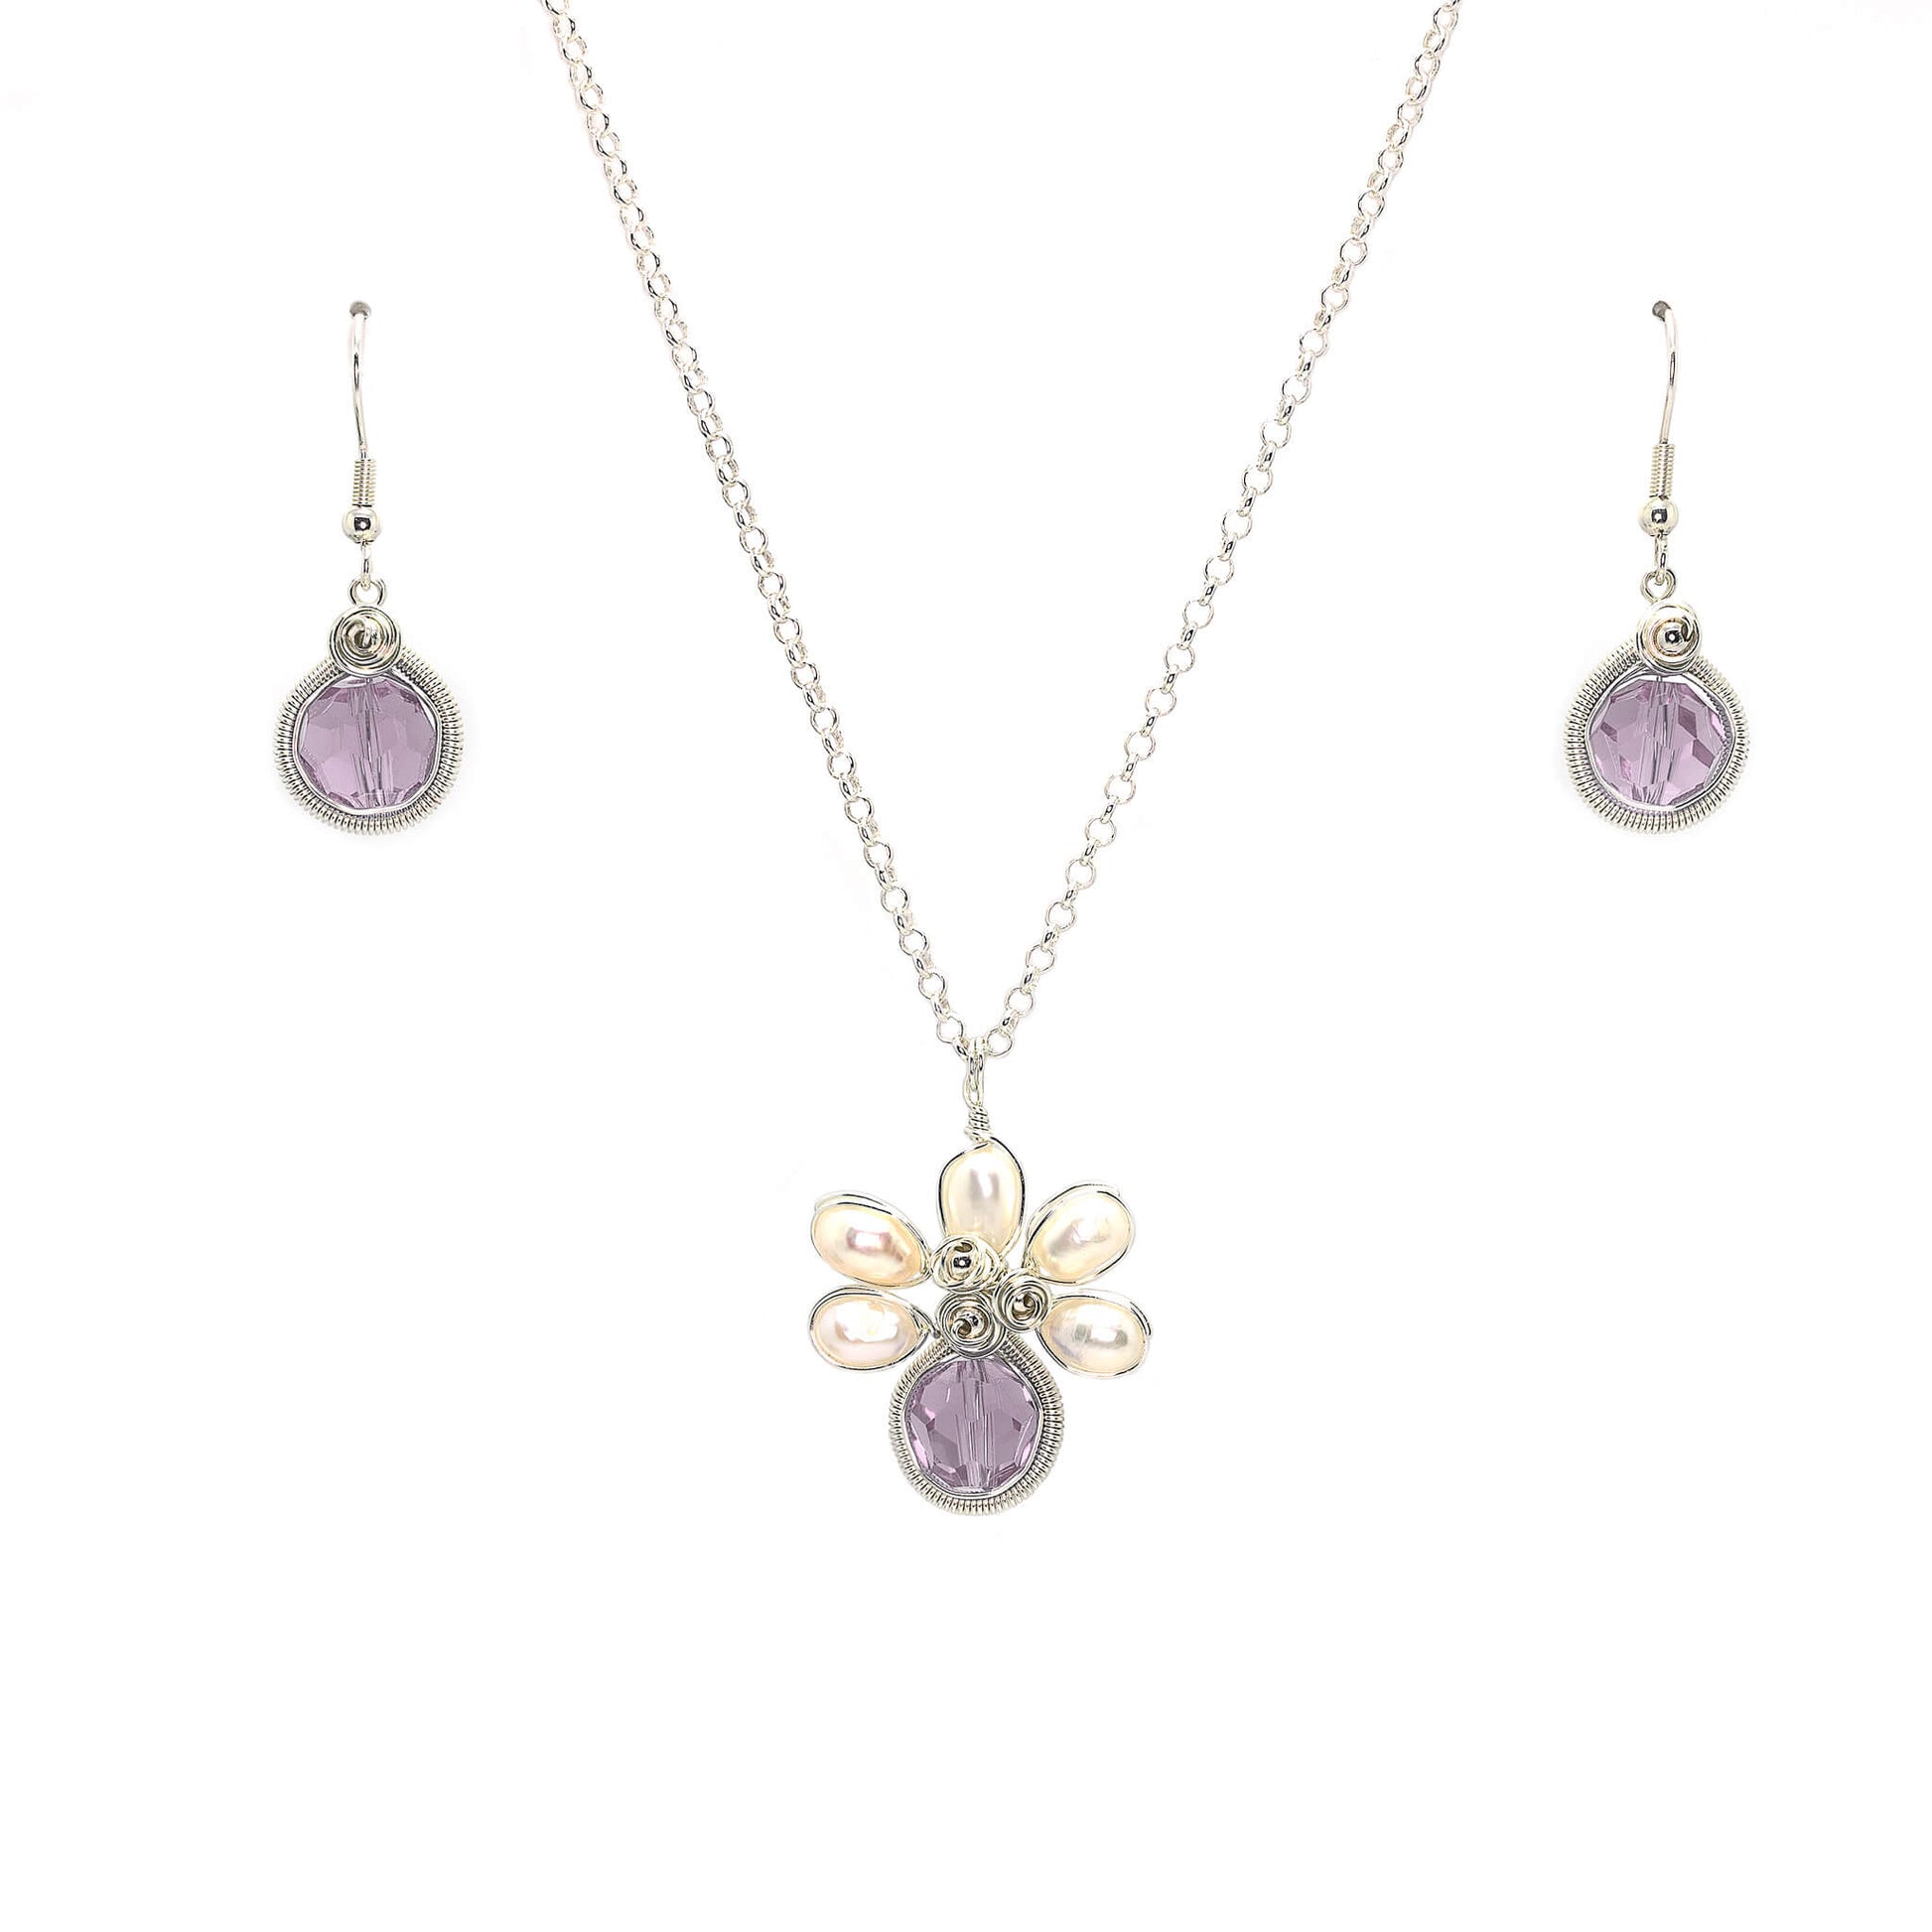 June Birthstone Crystal Necklace.-Earrings Set. Purple Crystals, Fresh Water Pearls  and Silver Set. 9.25 Sterling Silver Chain. 